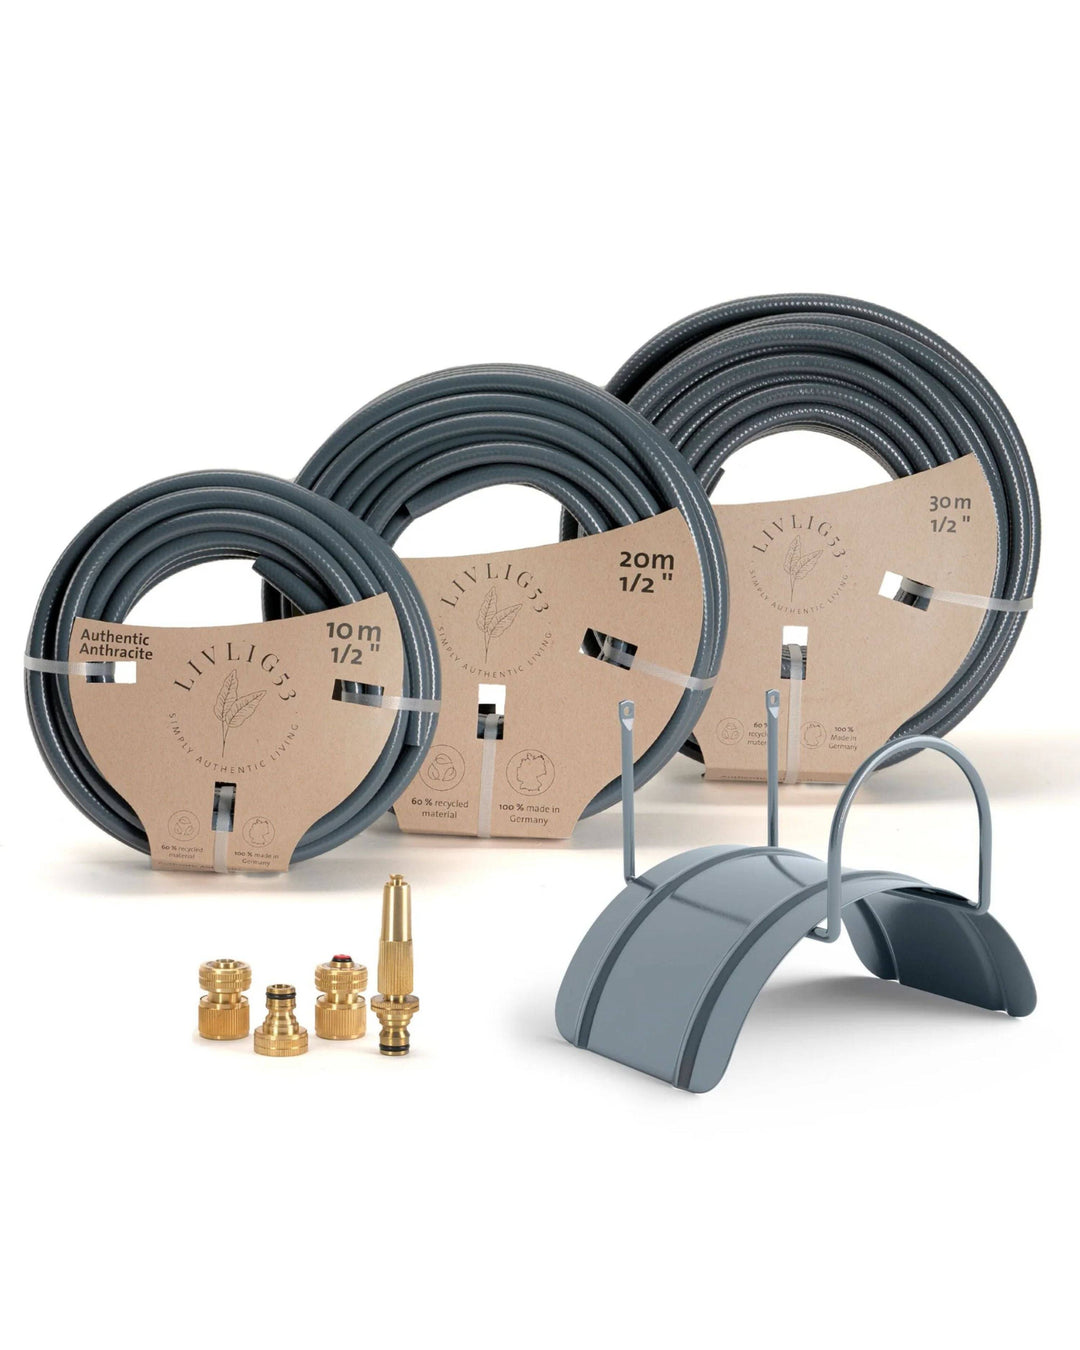 Garden hose Authentic Anthracite in a set